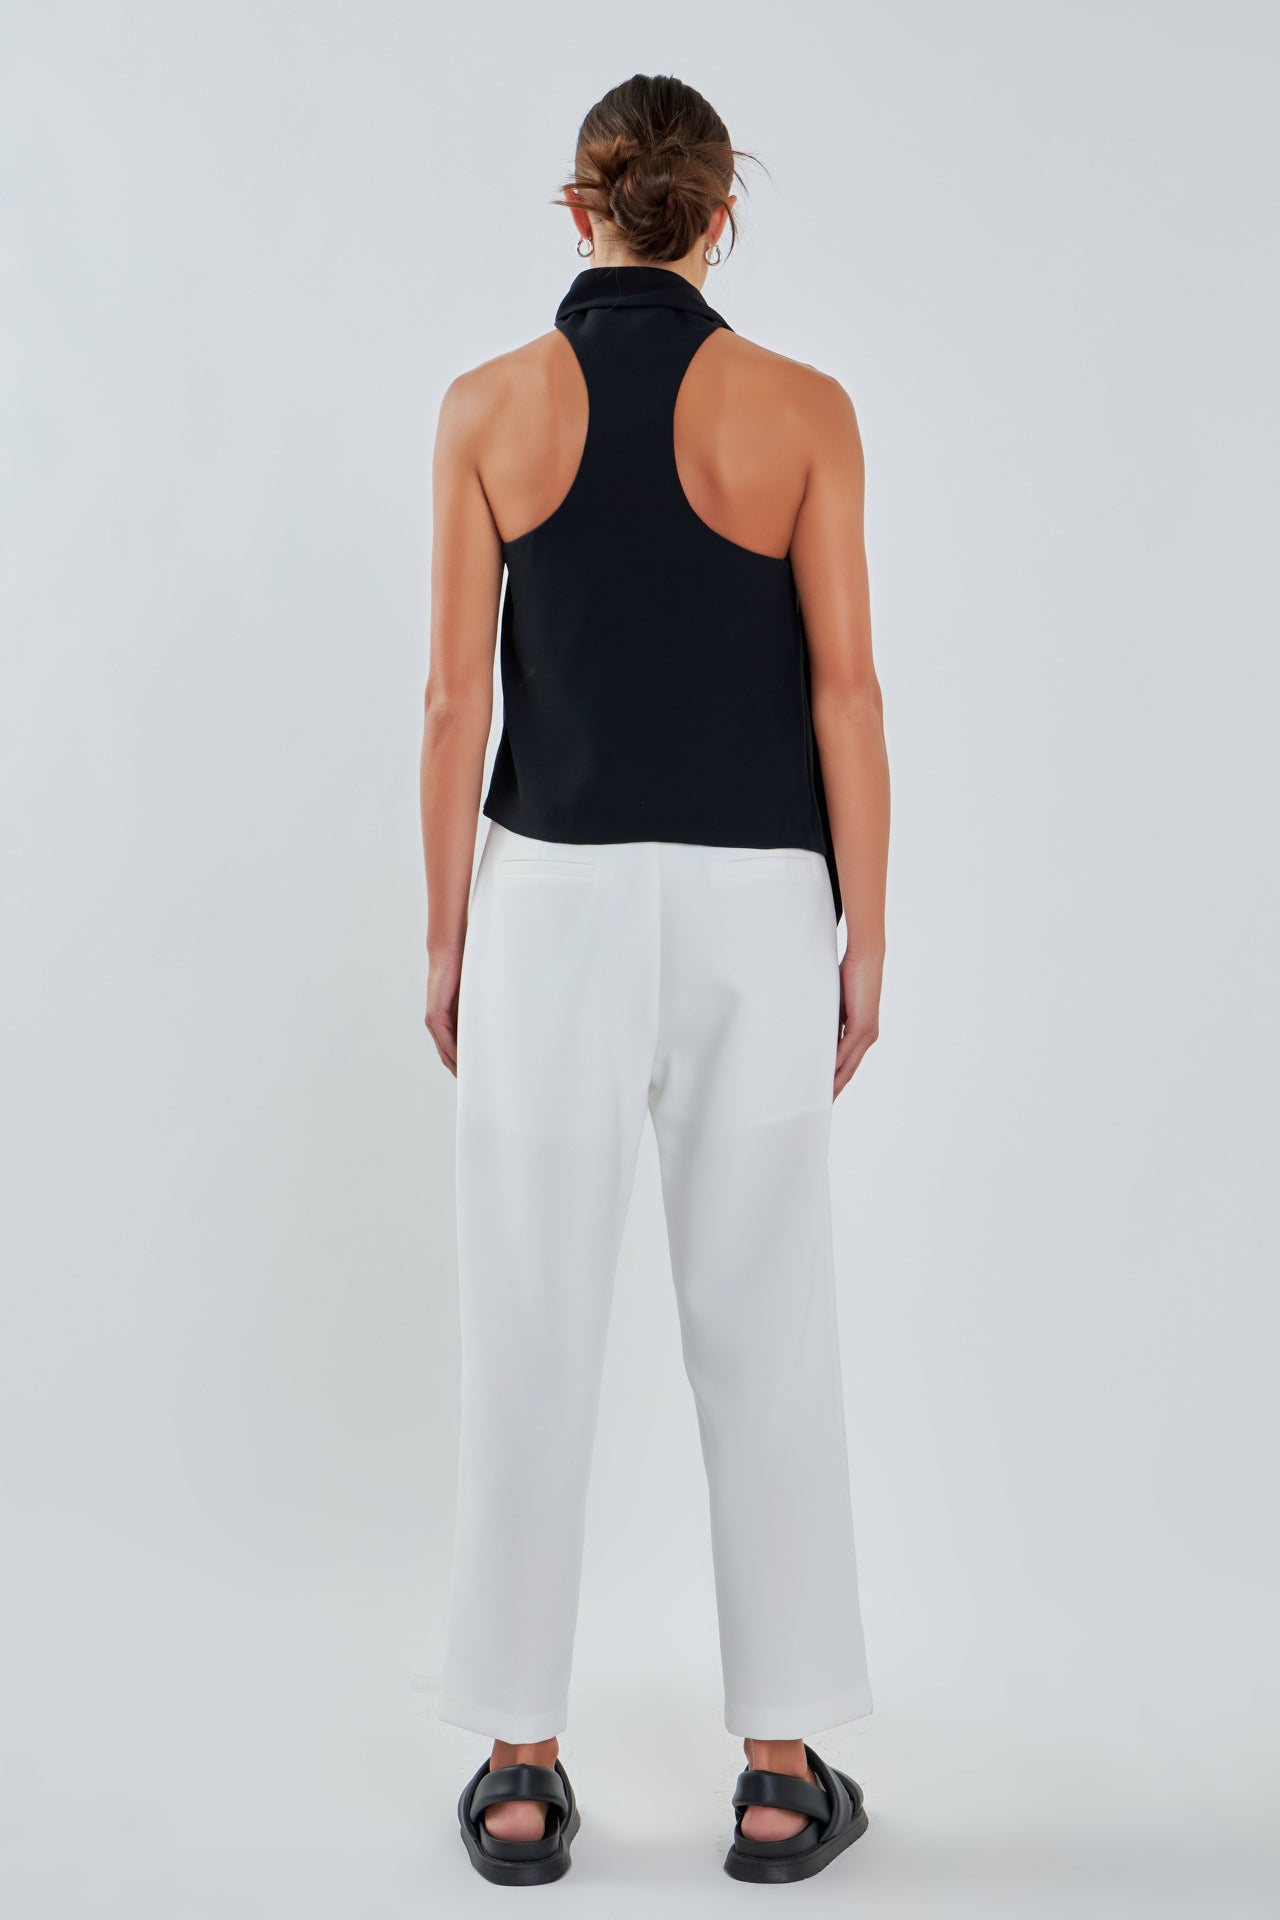 GREY LAB - Choker Tie Top - TOPS available at Objectrare